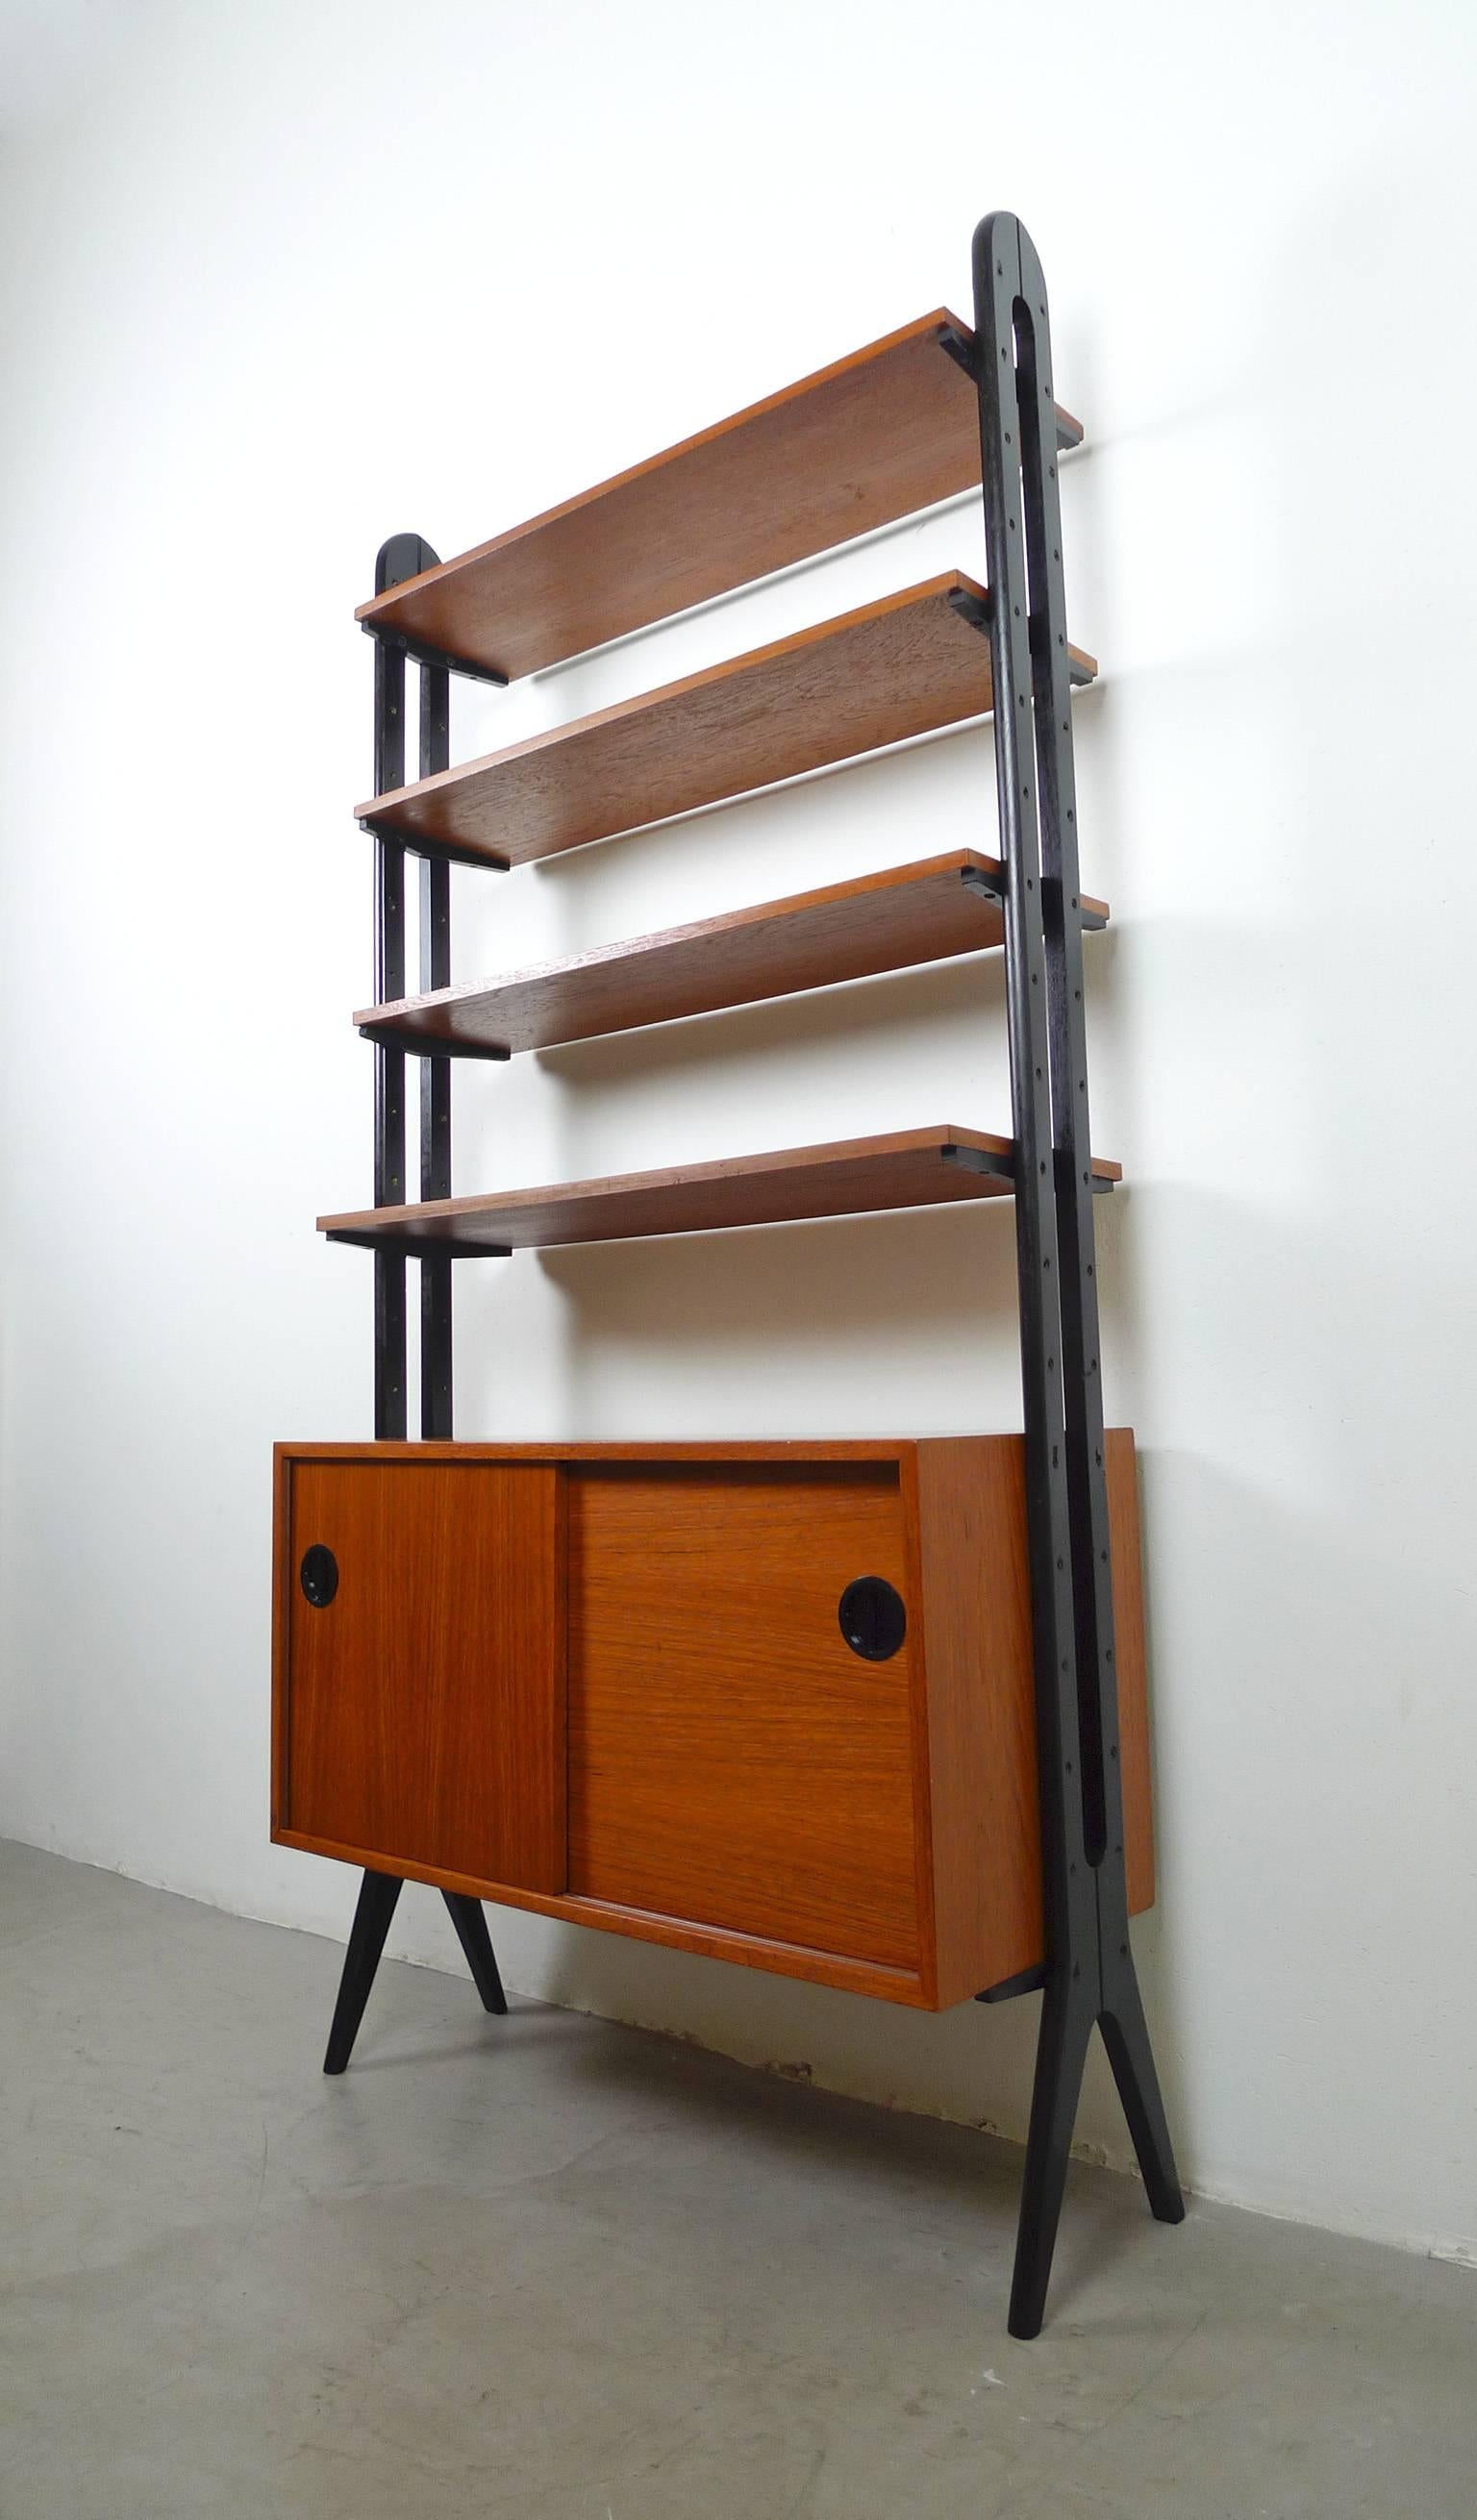 20th Century 1950s Teak Shelf with Box and Boards from Denmark